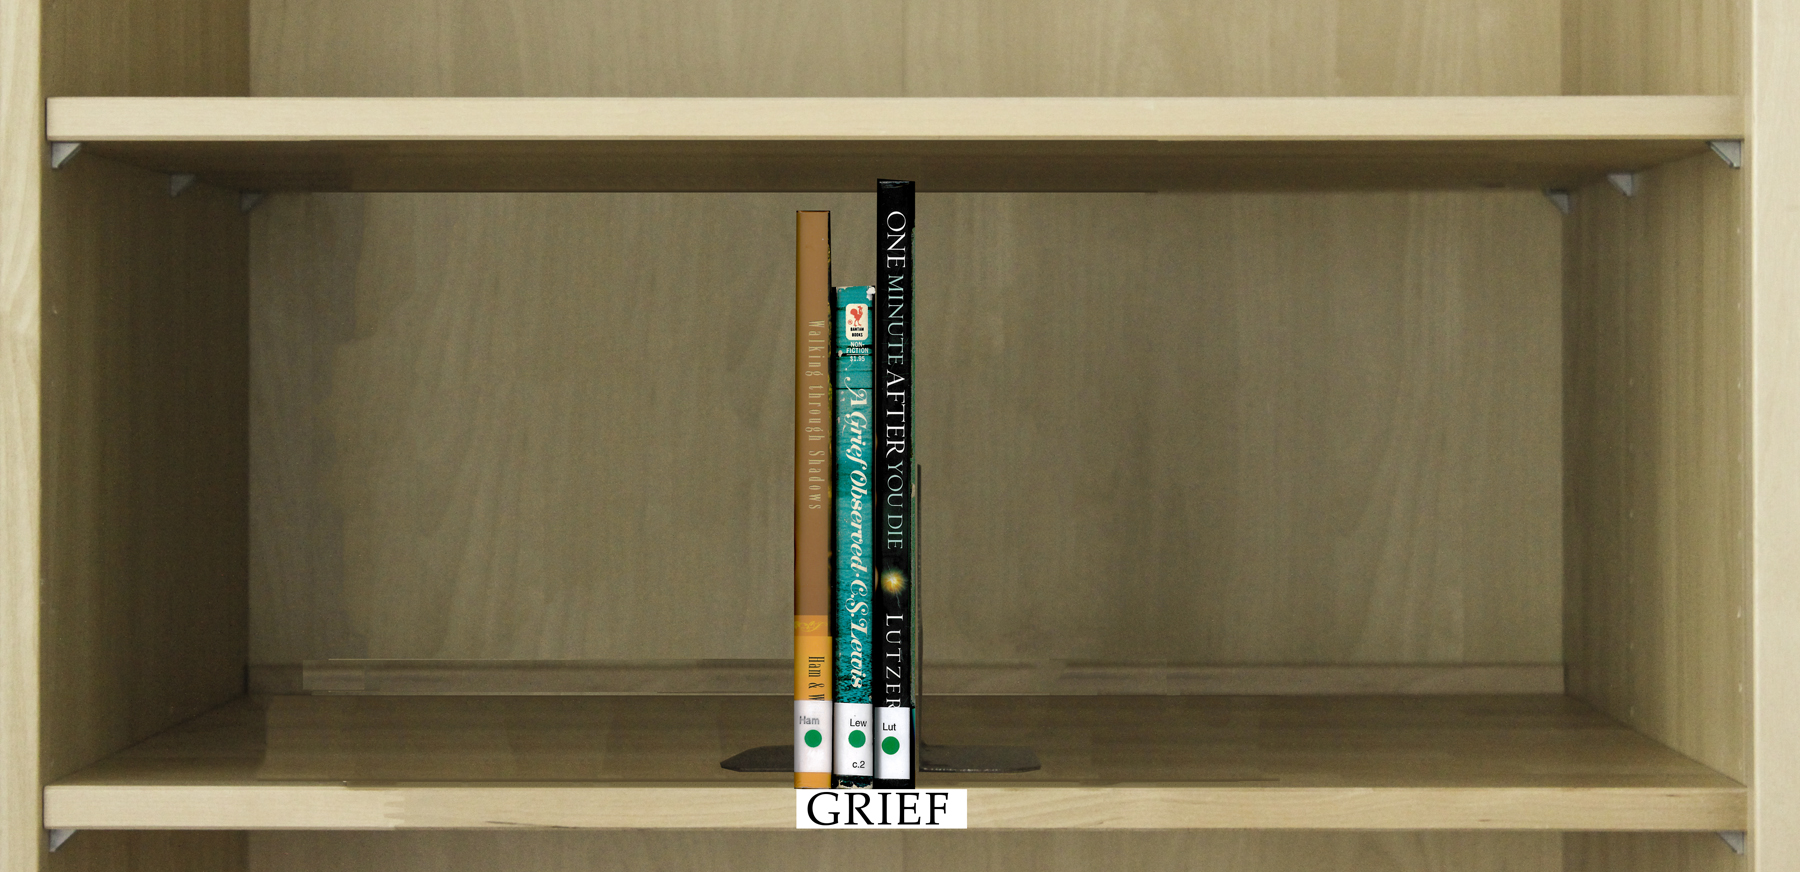 Index of Books Under the Category Grief.